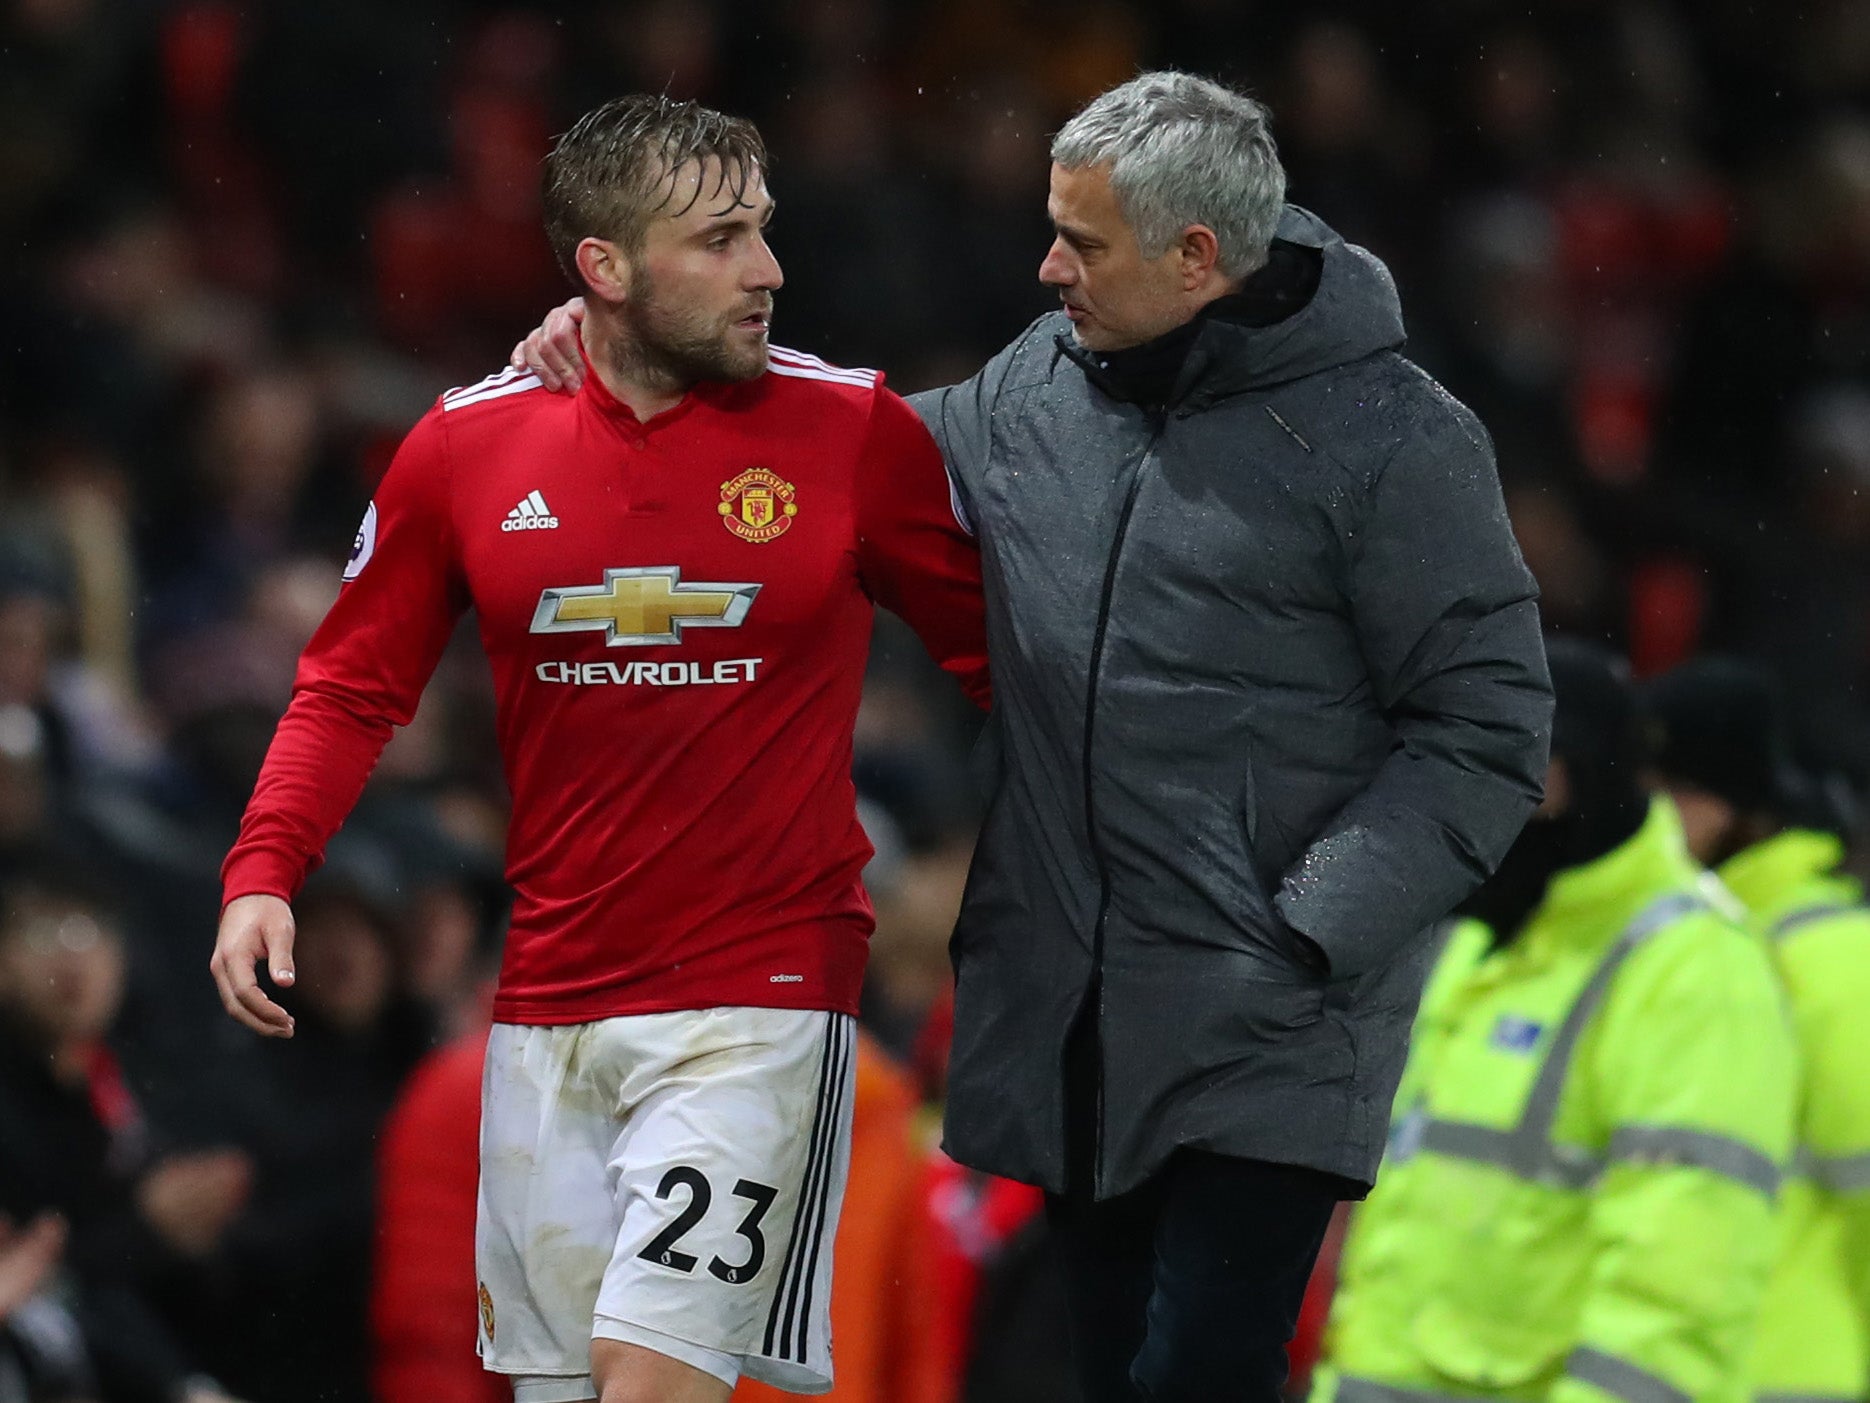 Shaw could leave in January